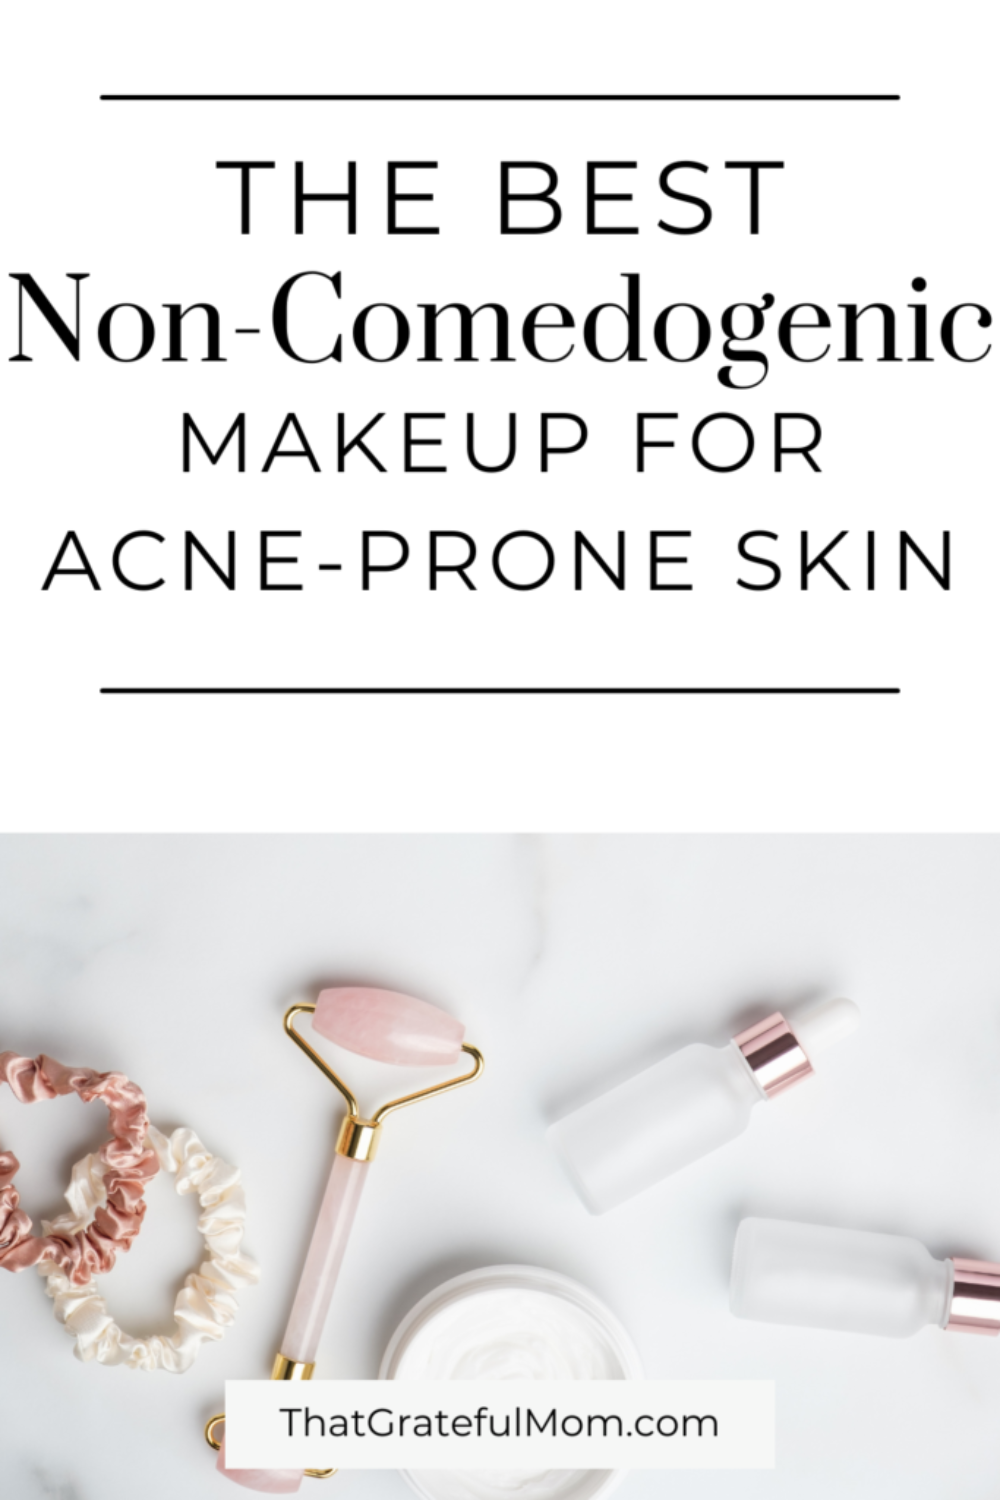 The best non-comedogenic makeup for acne-prone skin pin 2